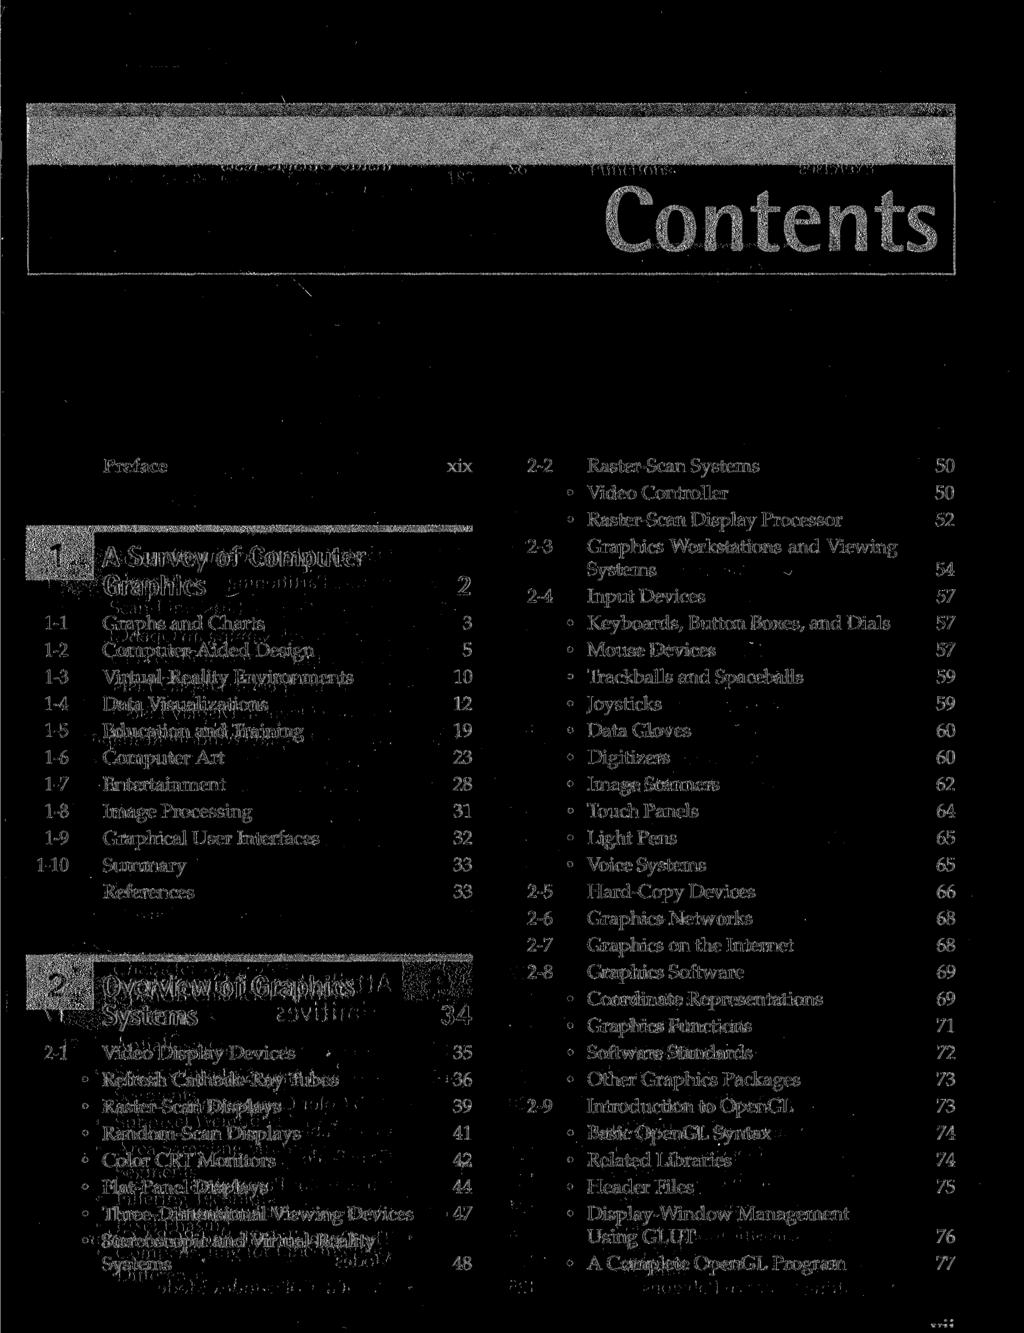 1-1 1-2 1-3 1-4 1-5 1-6 1-7 1-8 1-9 1-10 2-1 Preface A Survey of Computer Graphics Graphs and Charts Computer-Aided Design Virtual-Reality Environments Data Visualizations Education and Training